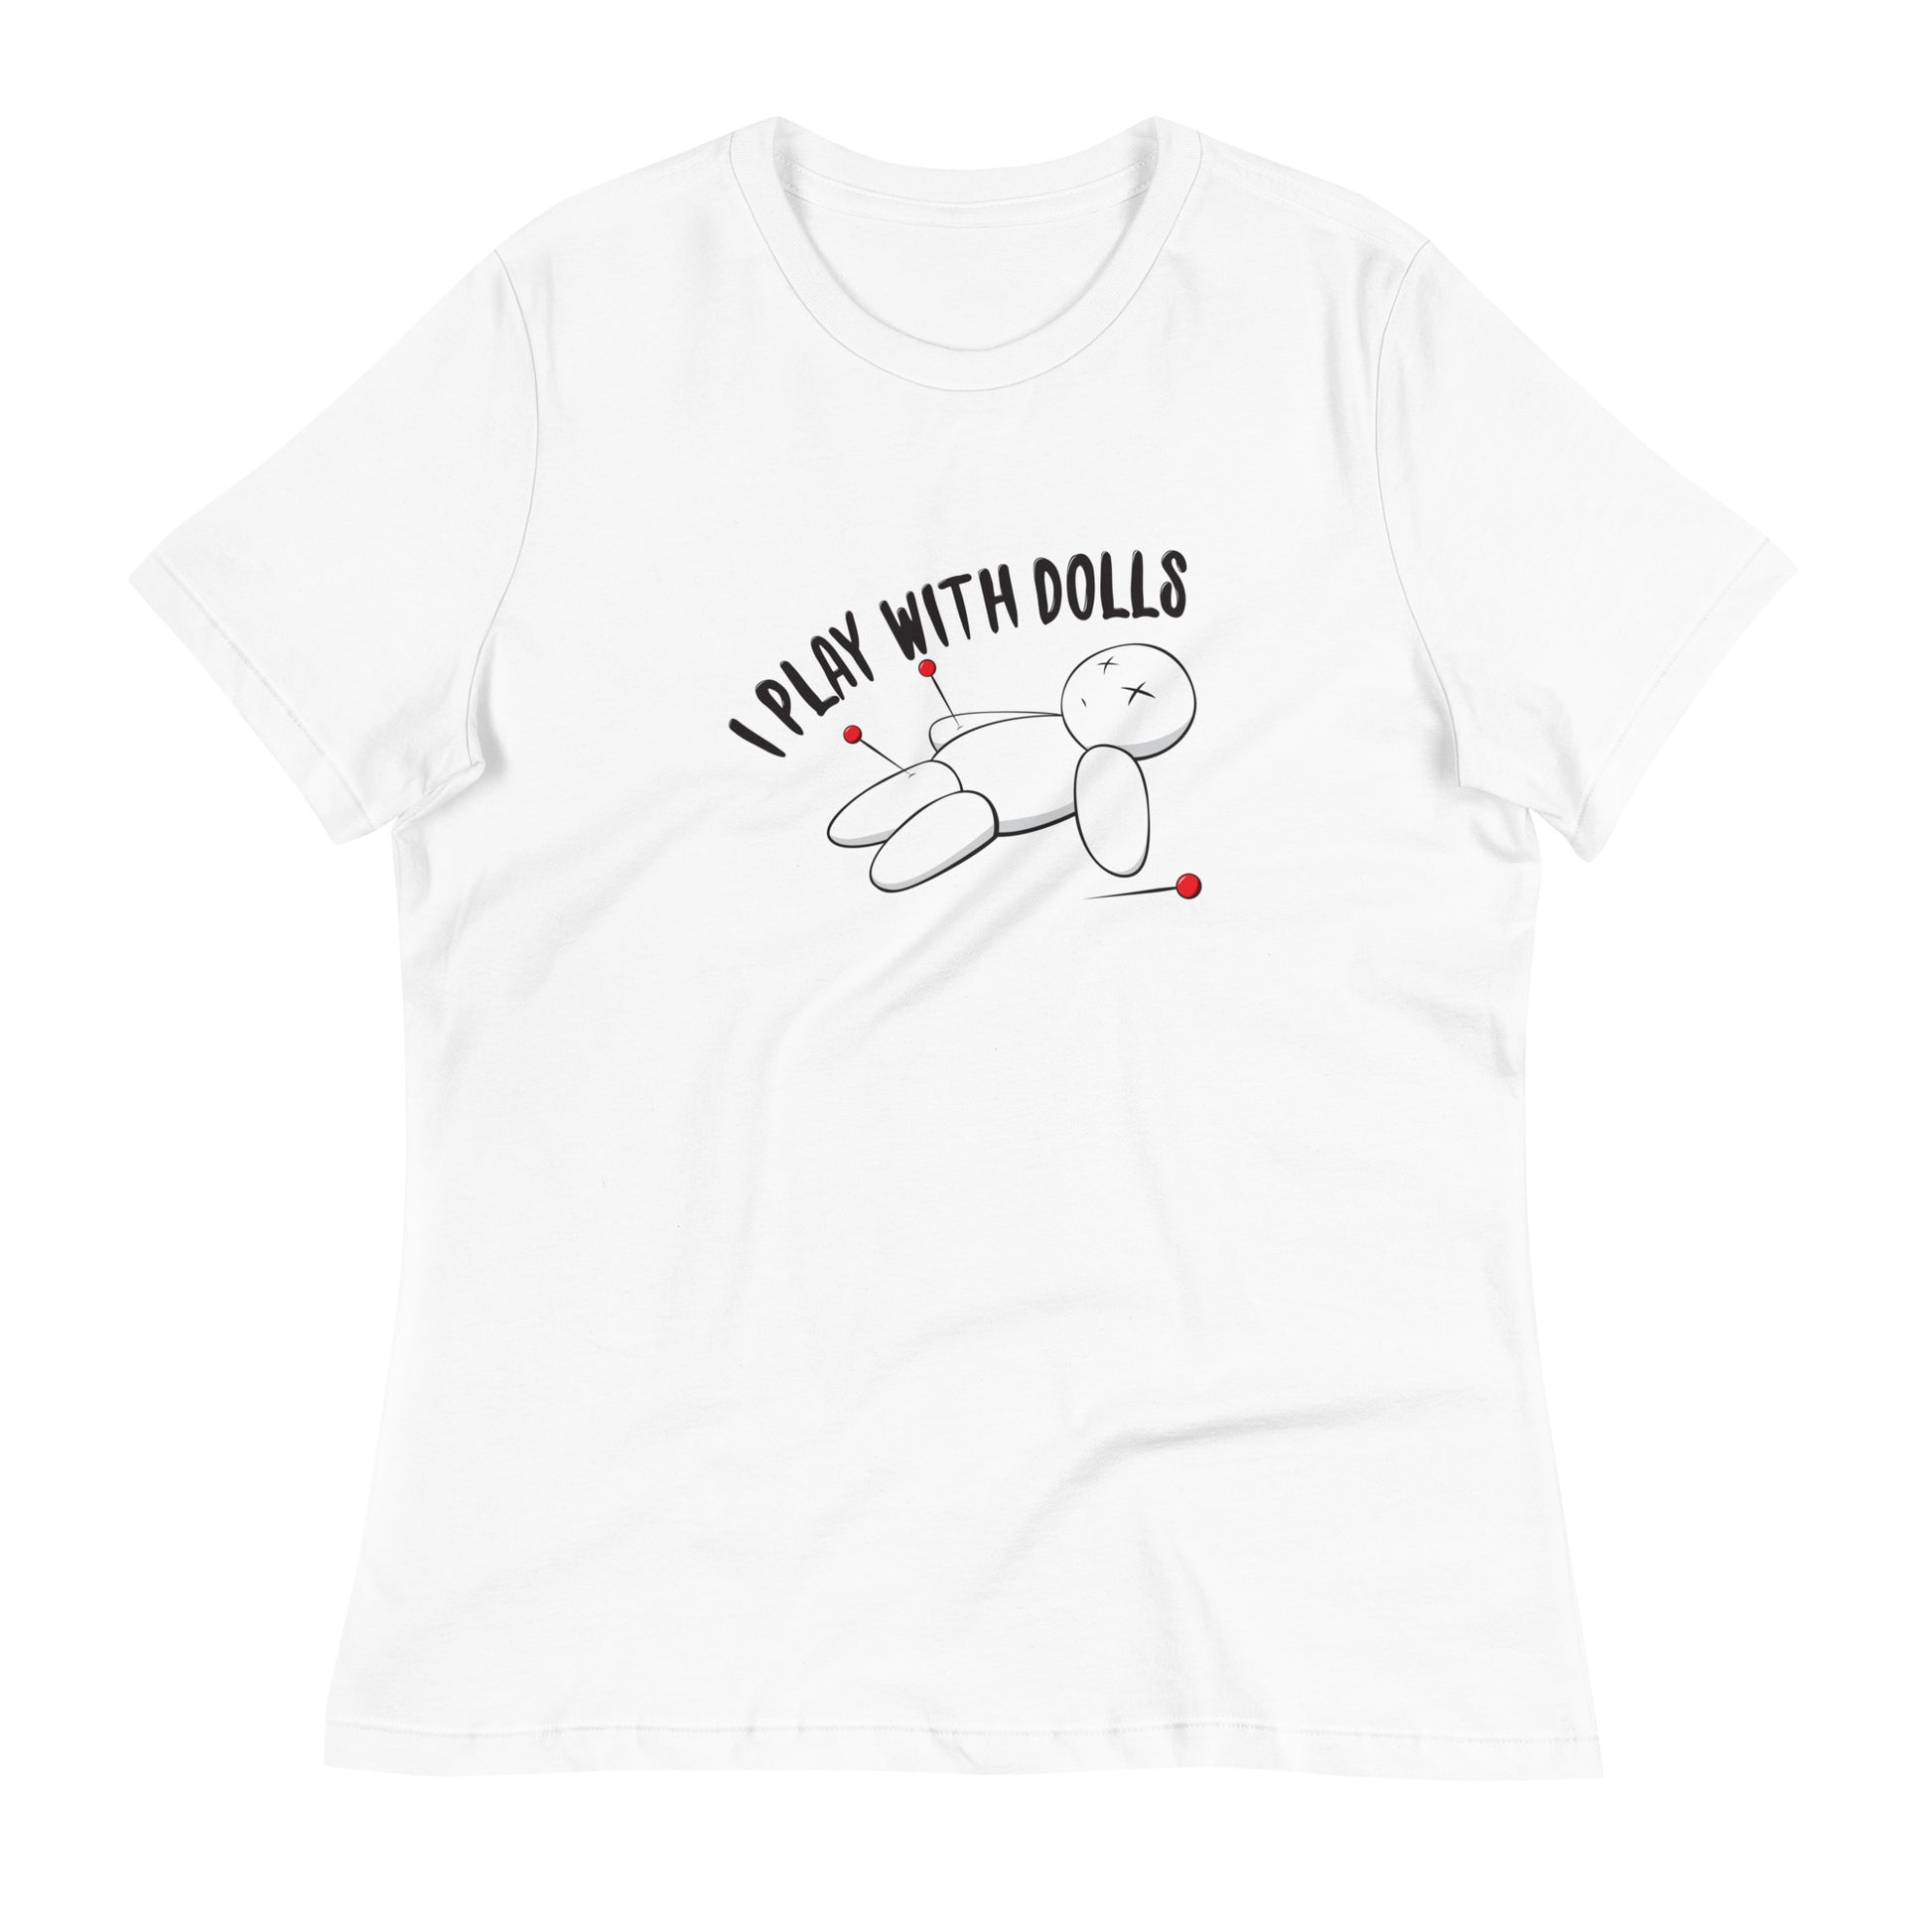 White women's relaxed fit t-shirt with graphic of white voodoo doll with Xs for eyes stuck with several pins and text "I PLAY WITH DOLLS"